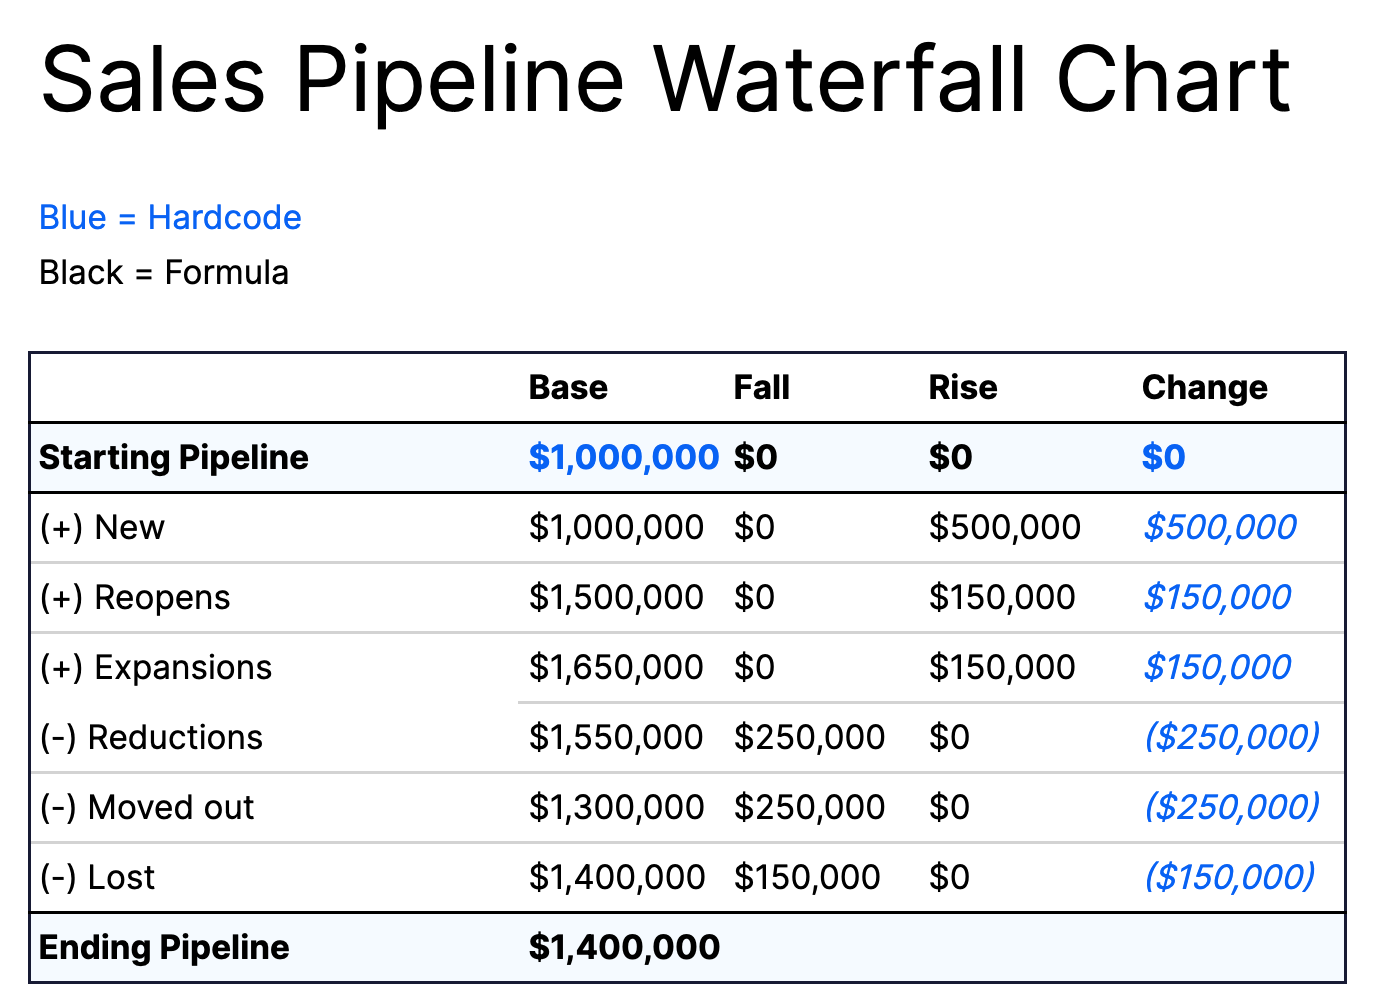 data table for building a sales pipeline waterfall chart